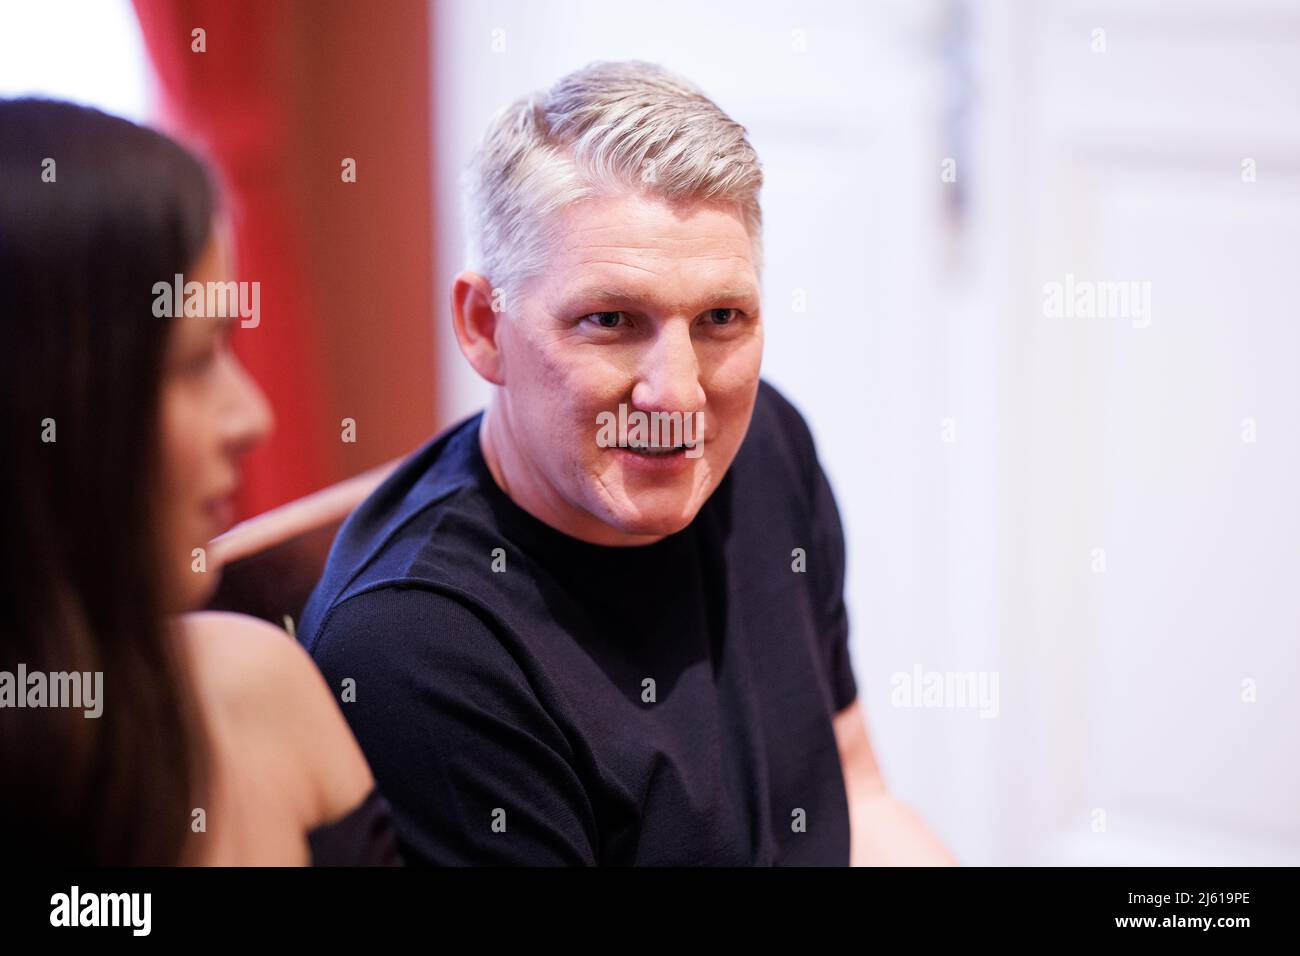 Munich, Germany. 26th Apr, 2022. EXCLUSIVE - Bastian Schweinsteiger, former German soccer player (r), and his wife Ana Ivanovic, Serbian former tennis player, give an interview on the sidelines of the Best Brands Awards 2022 ceremony at the Bayerischer Hof. Credit: Matthias Balk/dpa/Alamy Live News Stock Photo